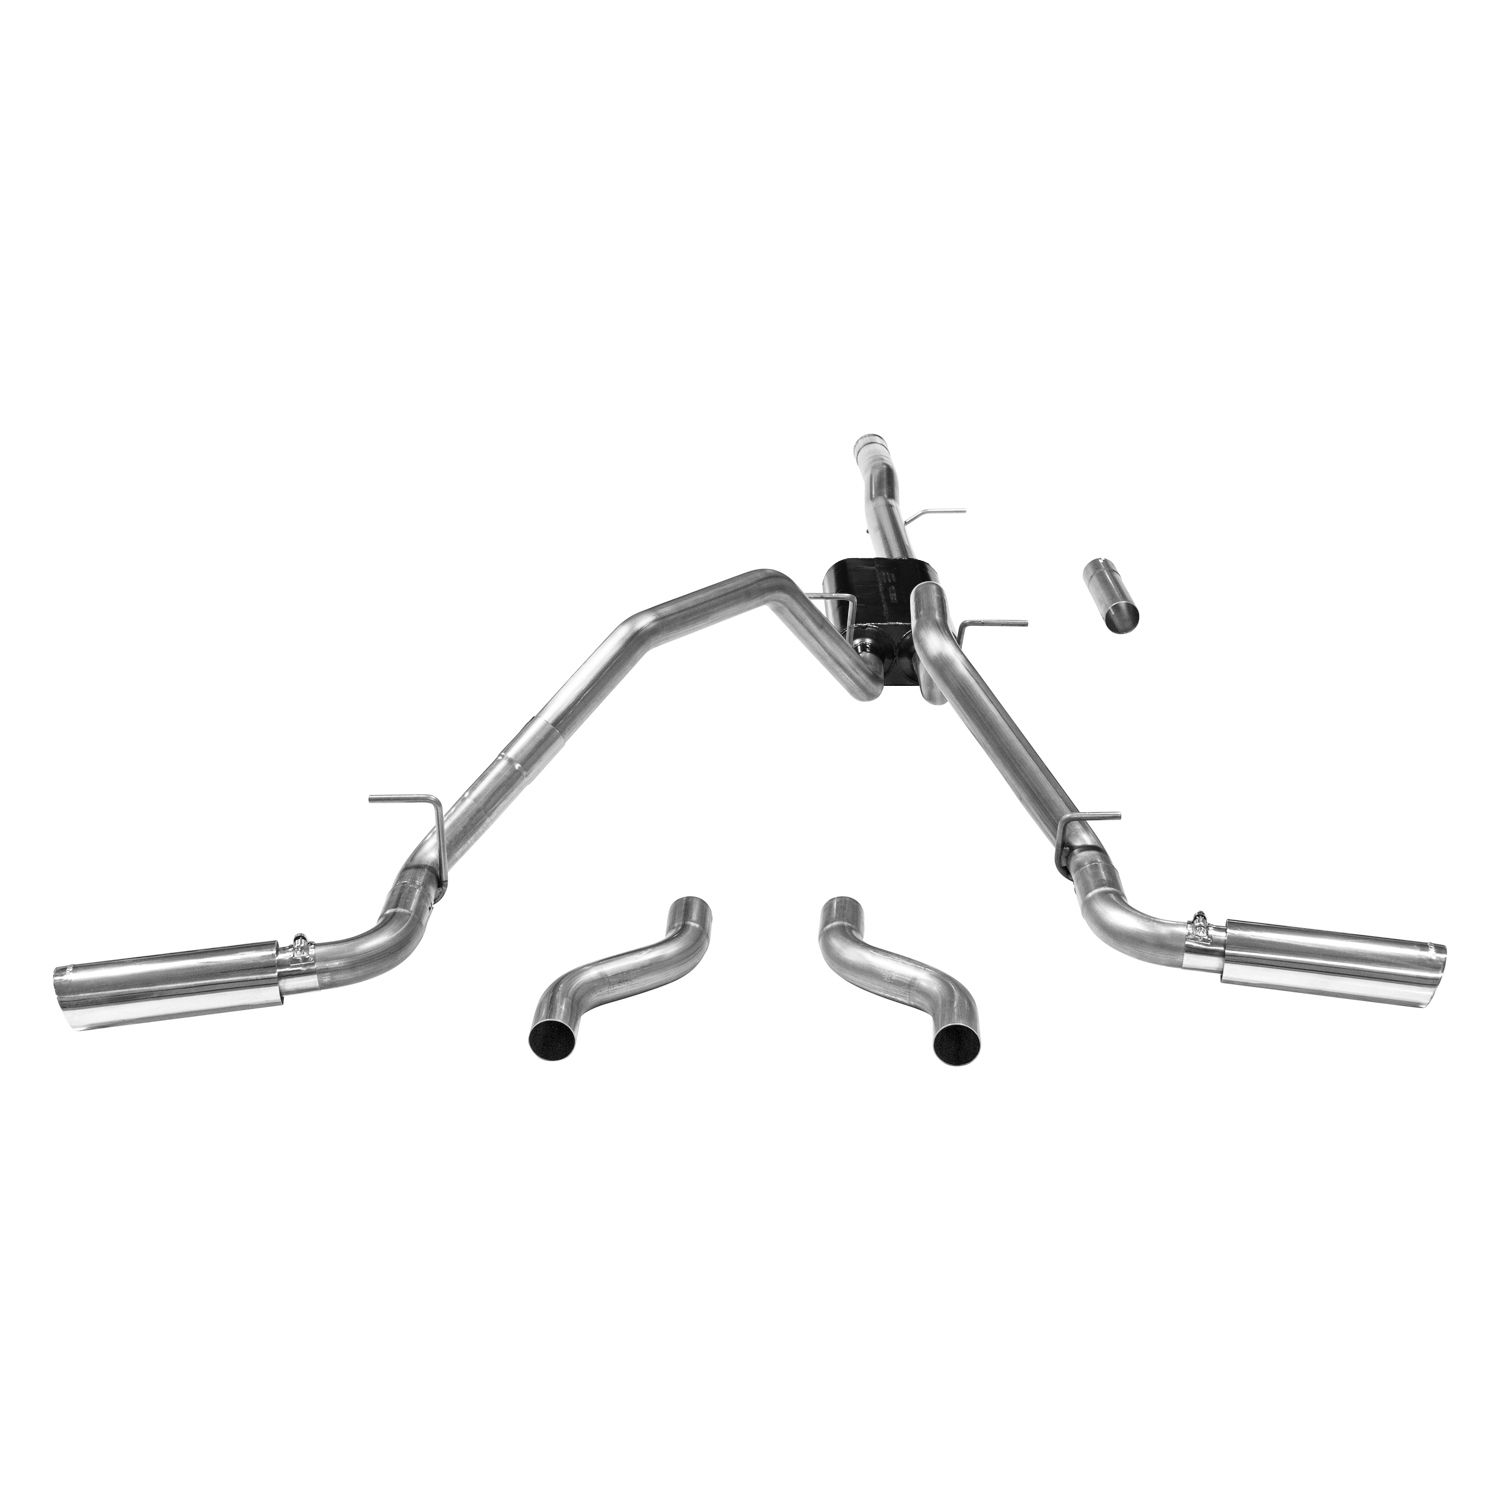 2011-2013 GMC Sierra 1500 SLE 6.2L Crew Cab/EXT Cab Flowmaster American Thunder Cat-Back Exhaust 69.3 inch Bed - 817602